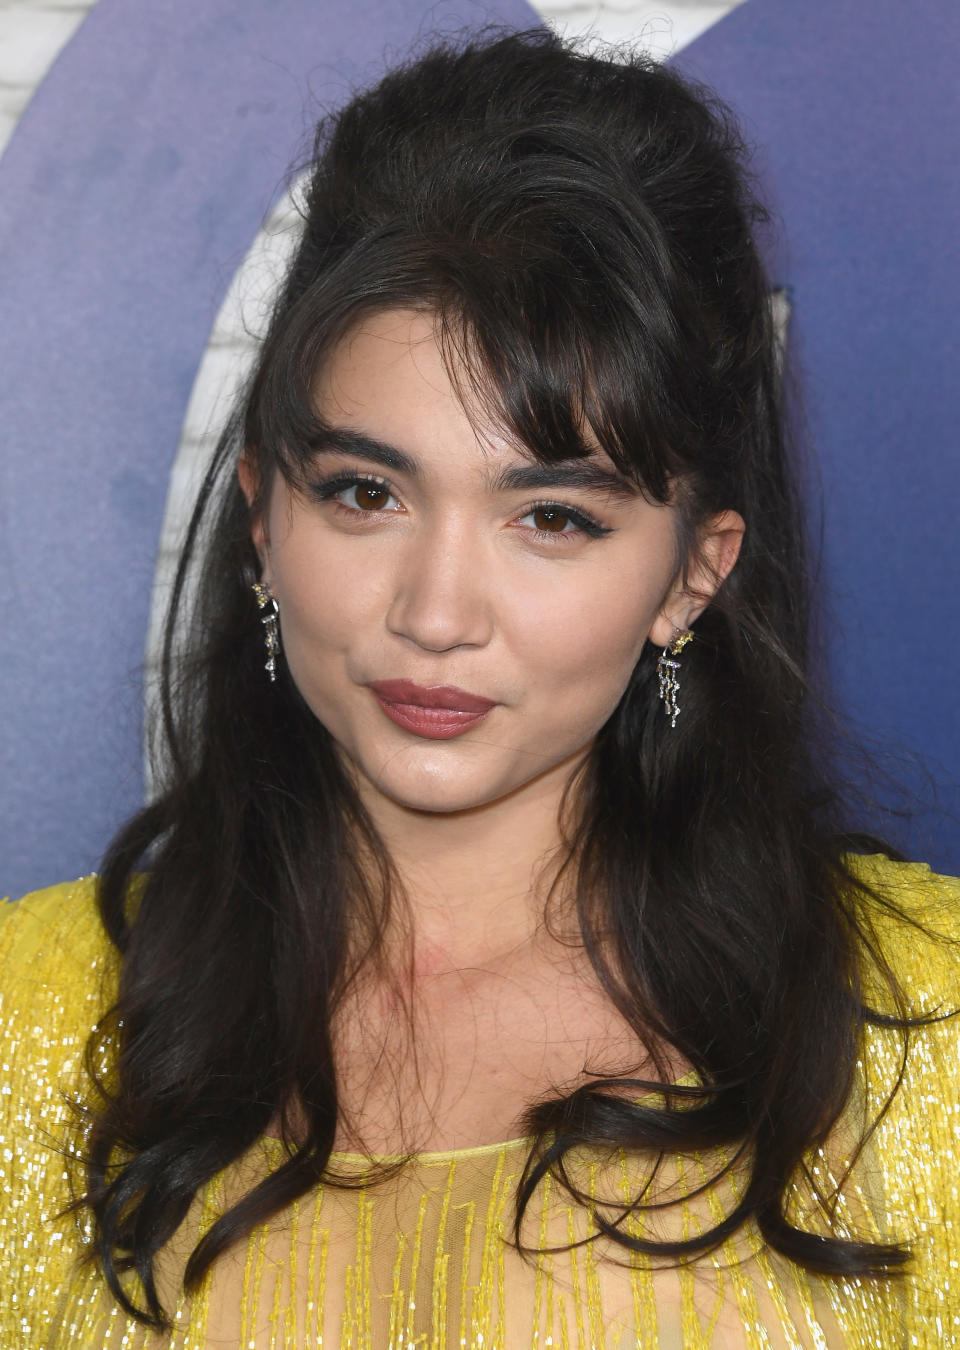 Rowan Blanchard attends the Los Angeles Premiere Of Hulu's Original Film "Crush" held at NeueHouse Los Angeles on April 27, 2022 in Hollywood, California